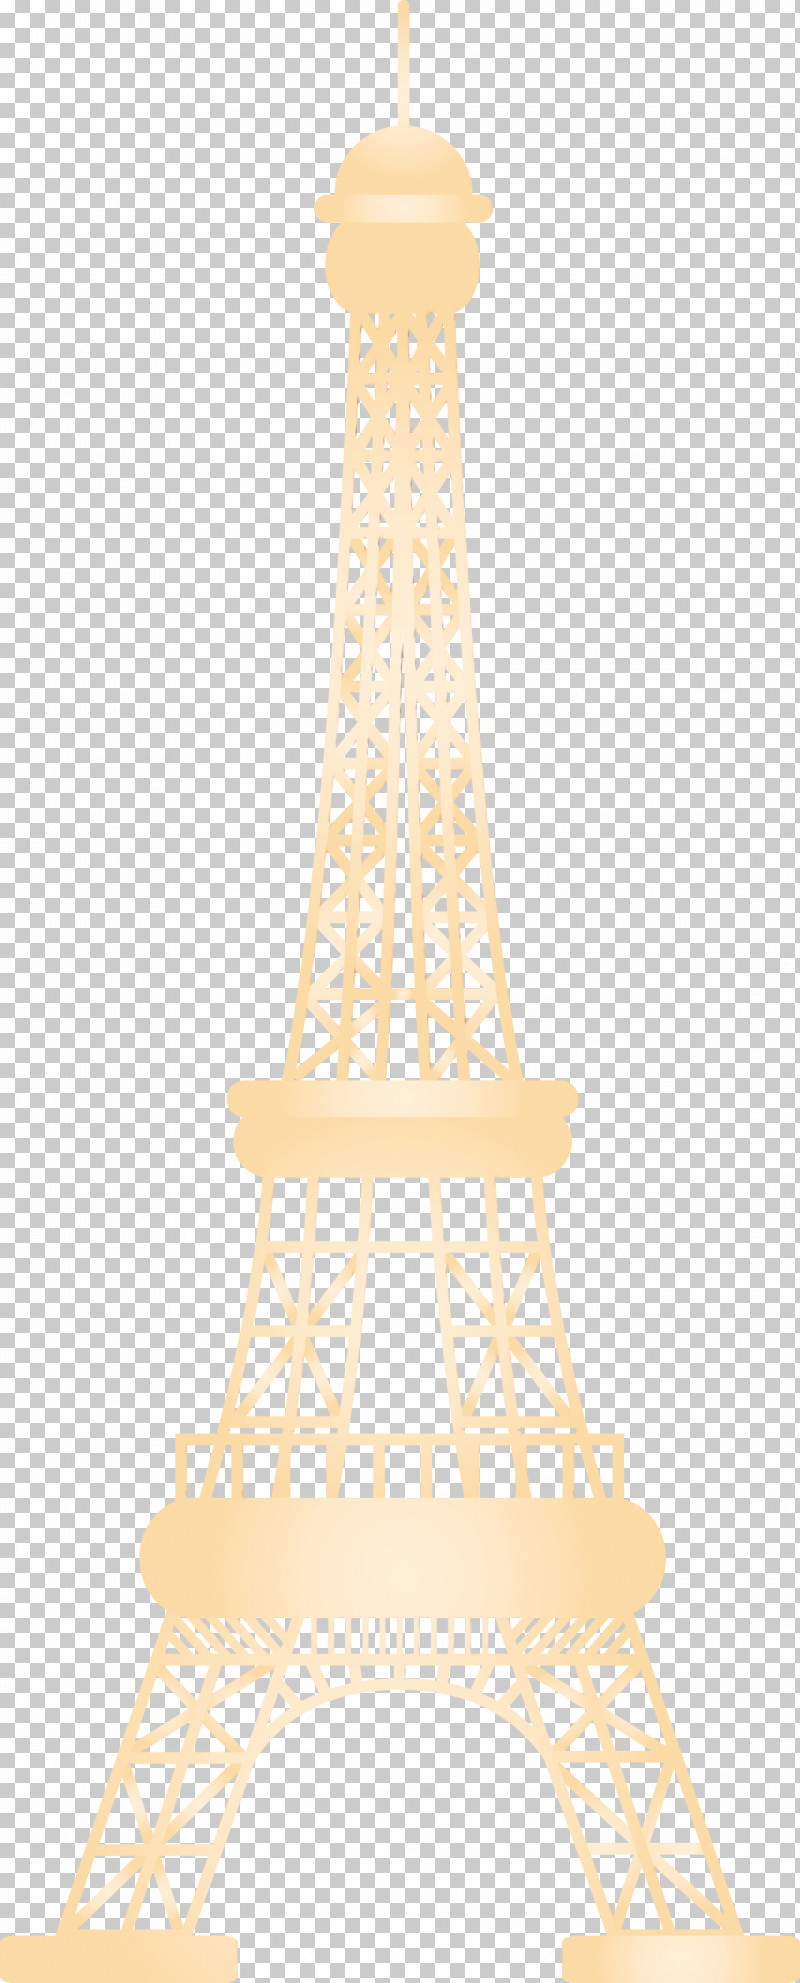 Klcc East Gate Tower Meter Font Tower PNG, Clipart, Klcc East Gate Tower, Meter, Paint, Tower, Watercolor Free PNG Download